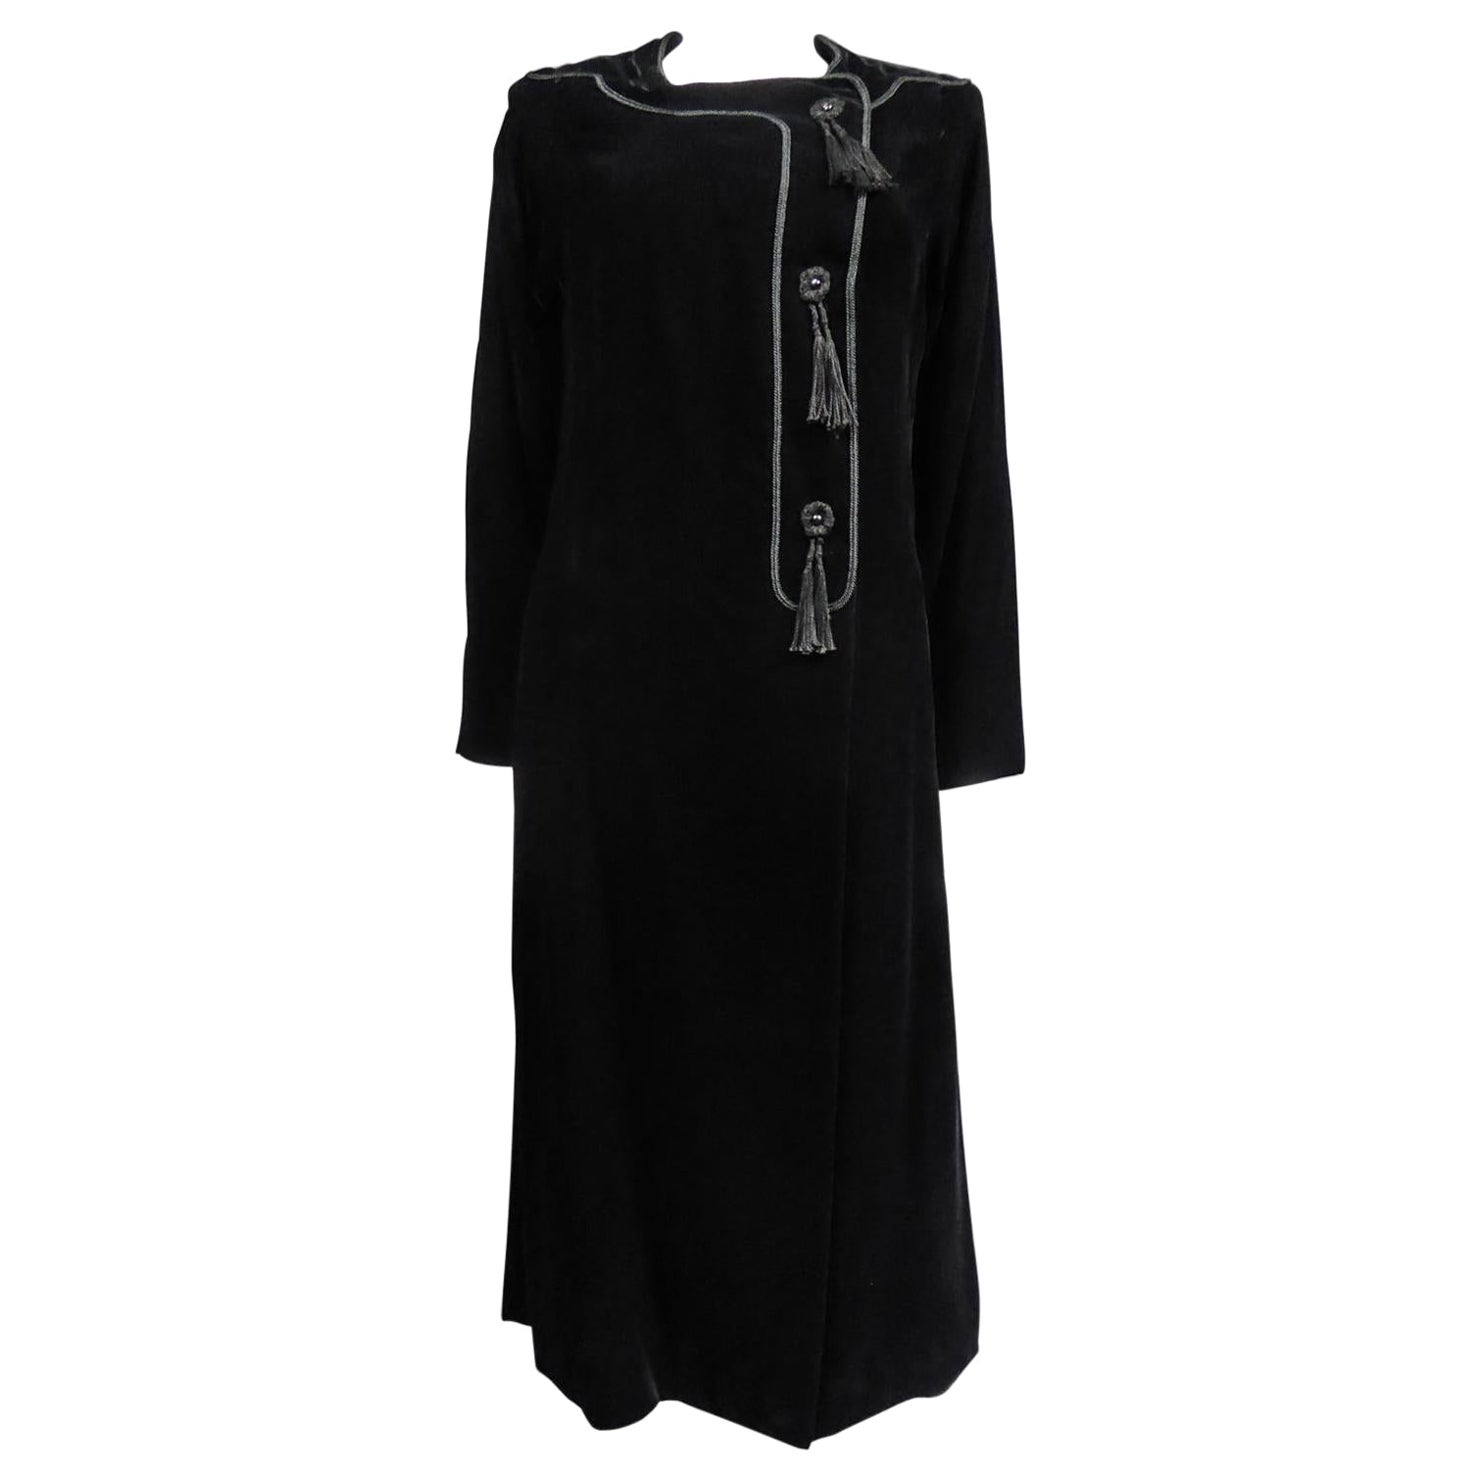 A french Couture Emanuel Ungaro Little Black Dress Number 4383-10-76 Circa 1976 For Sale